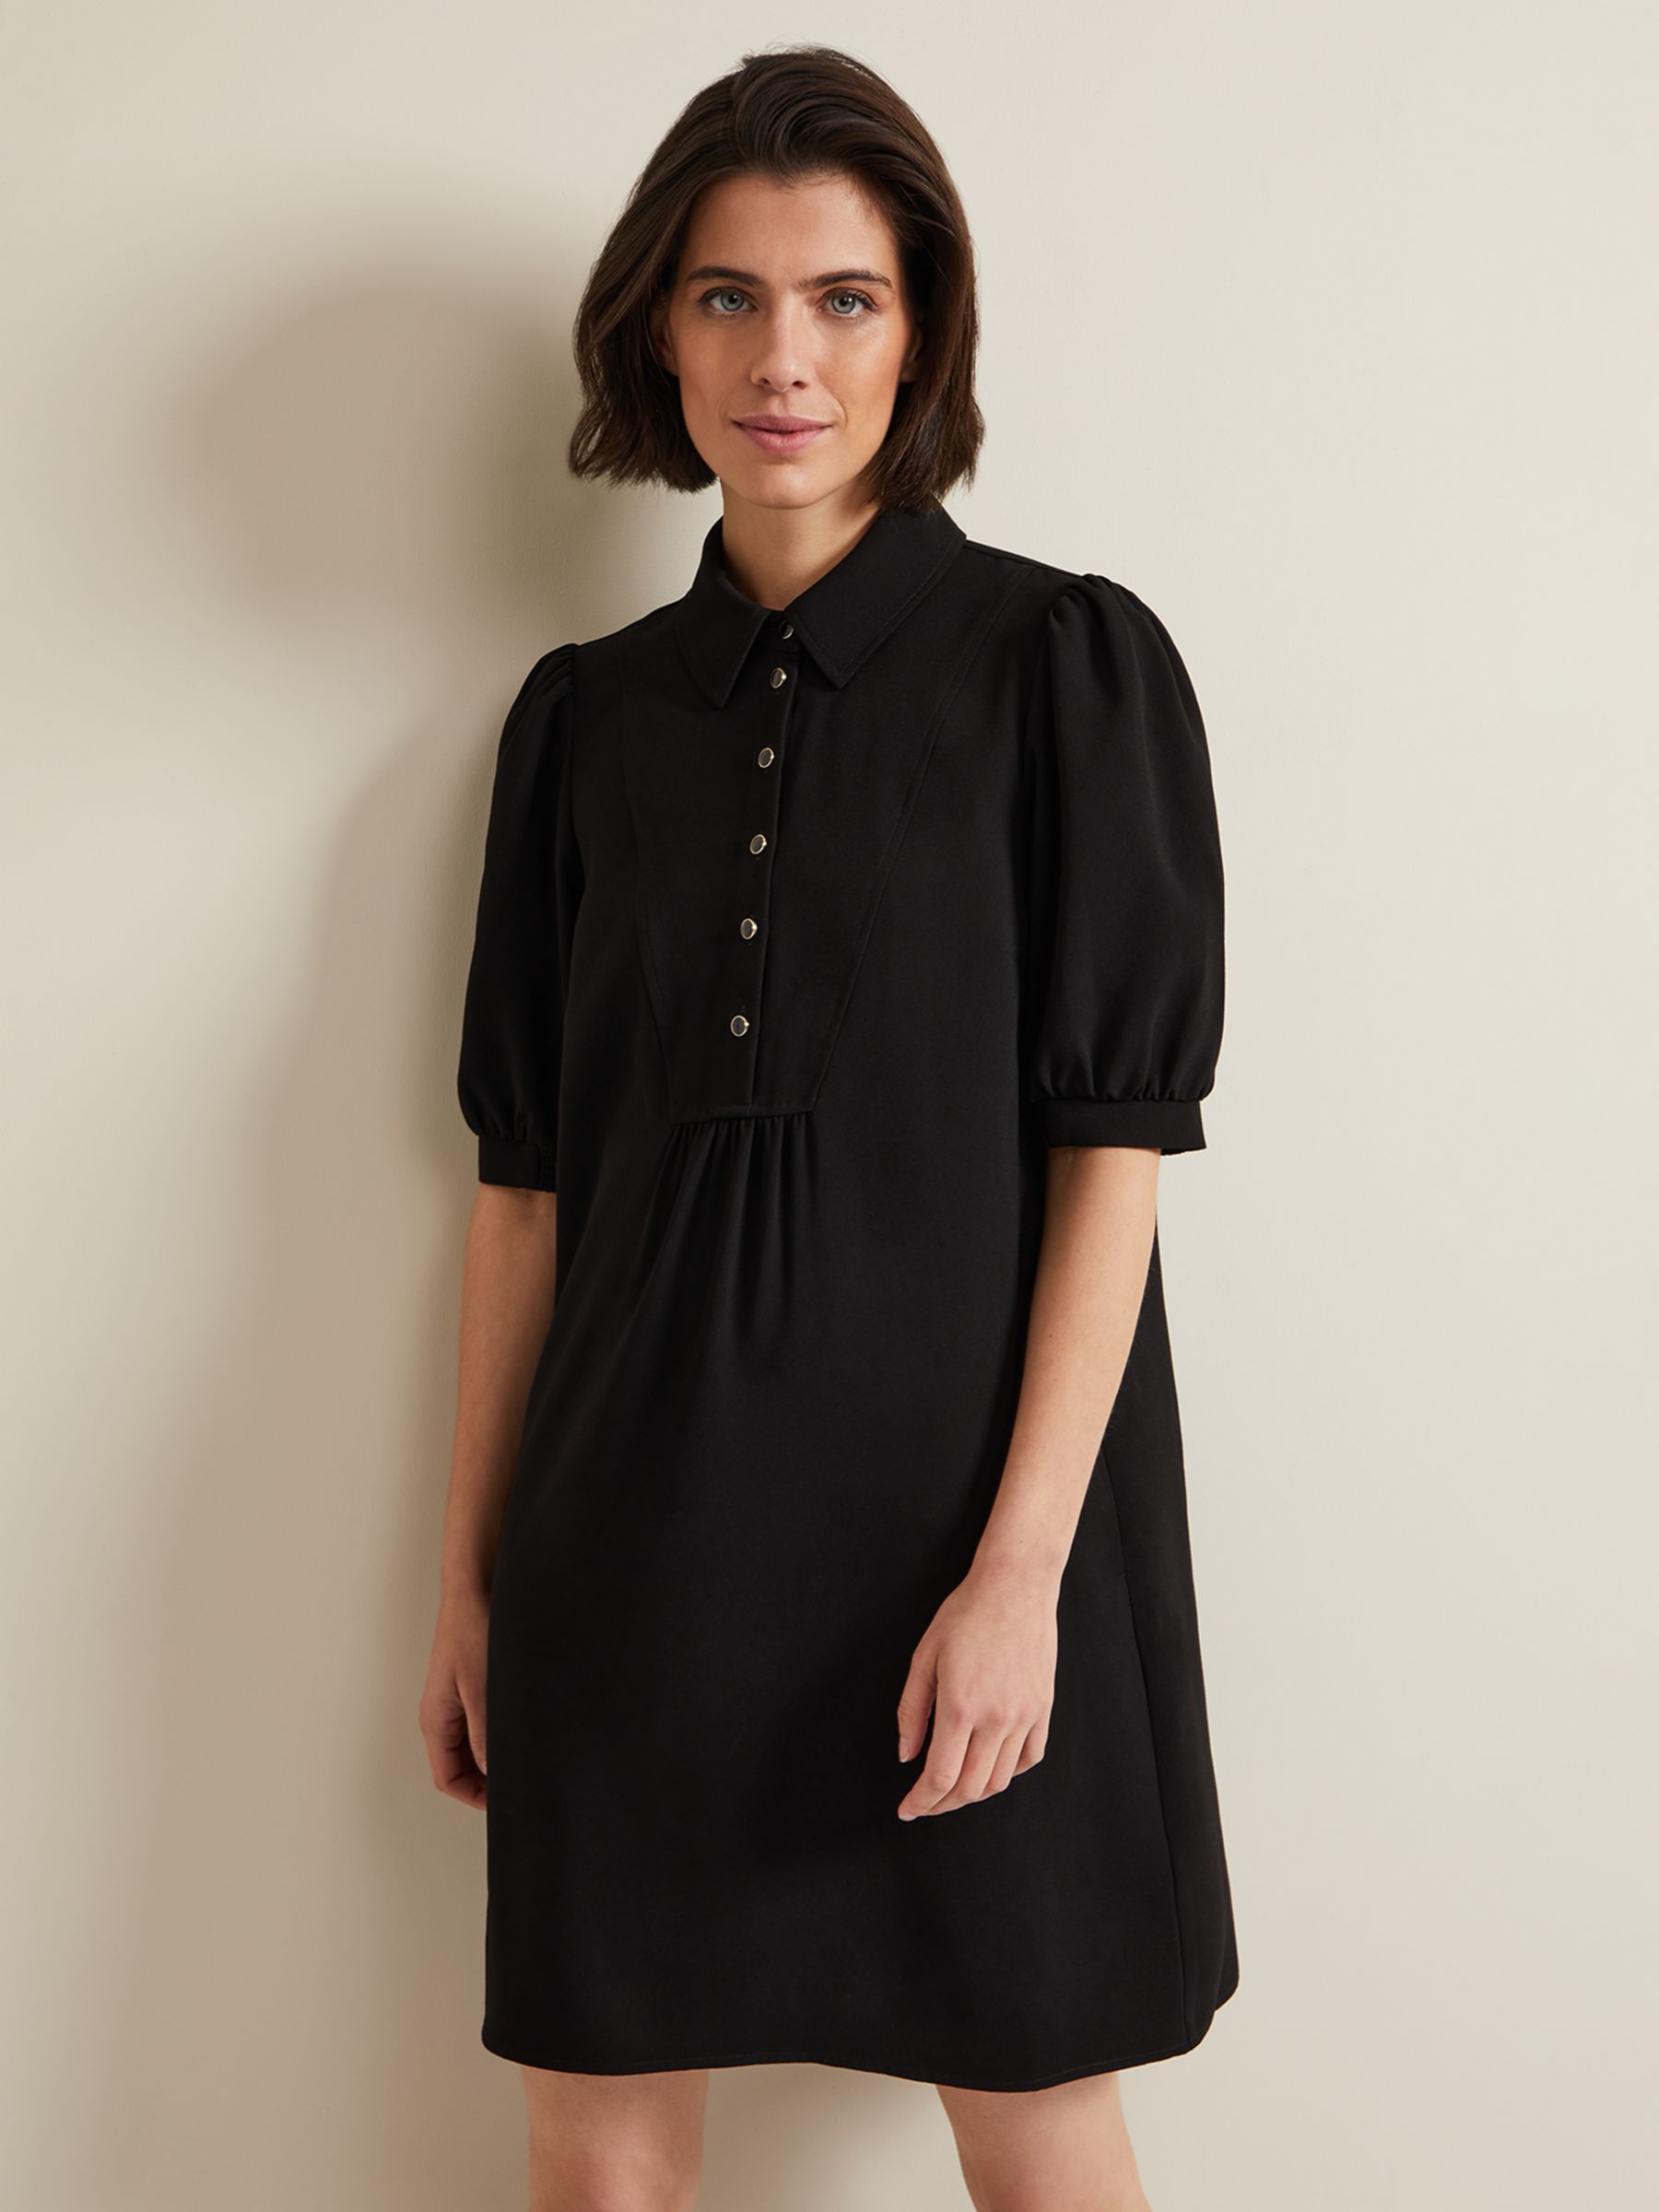 Black Tunic Dress with Statement Buttons, Phase Eight